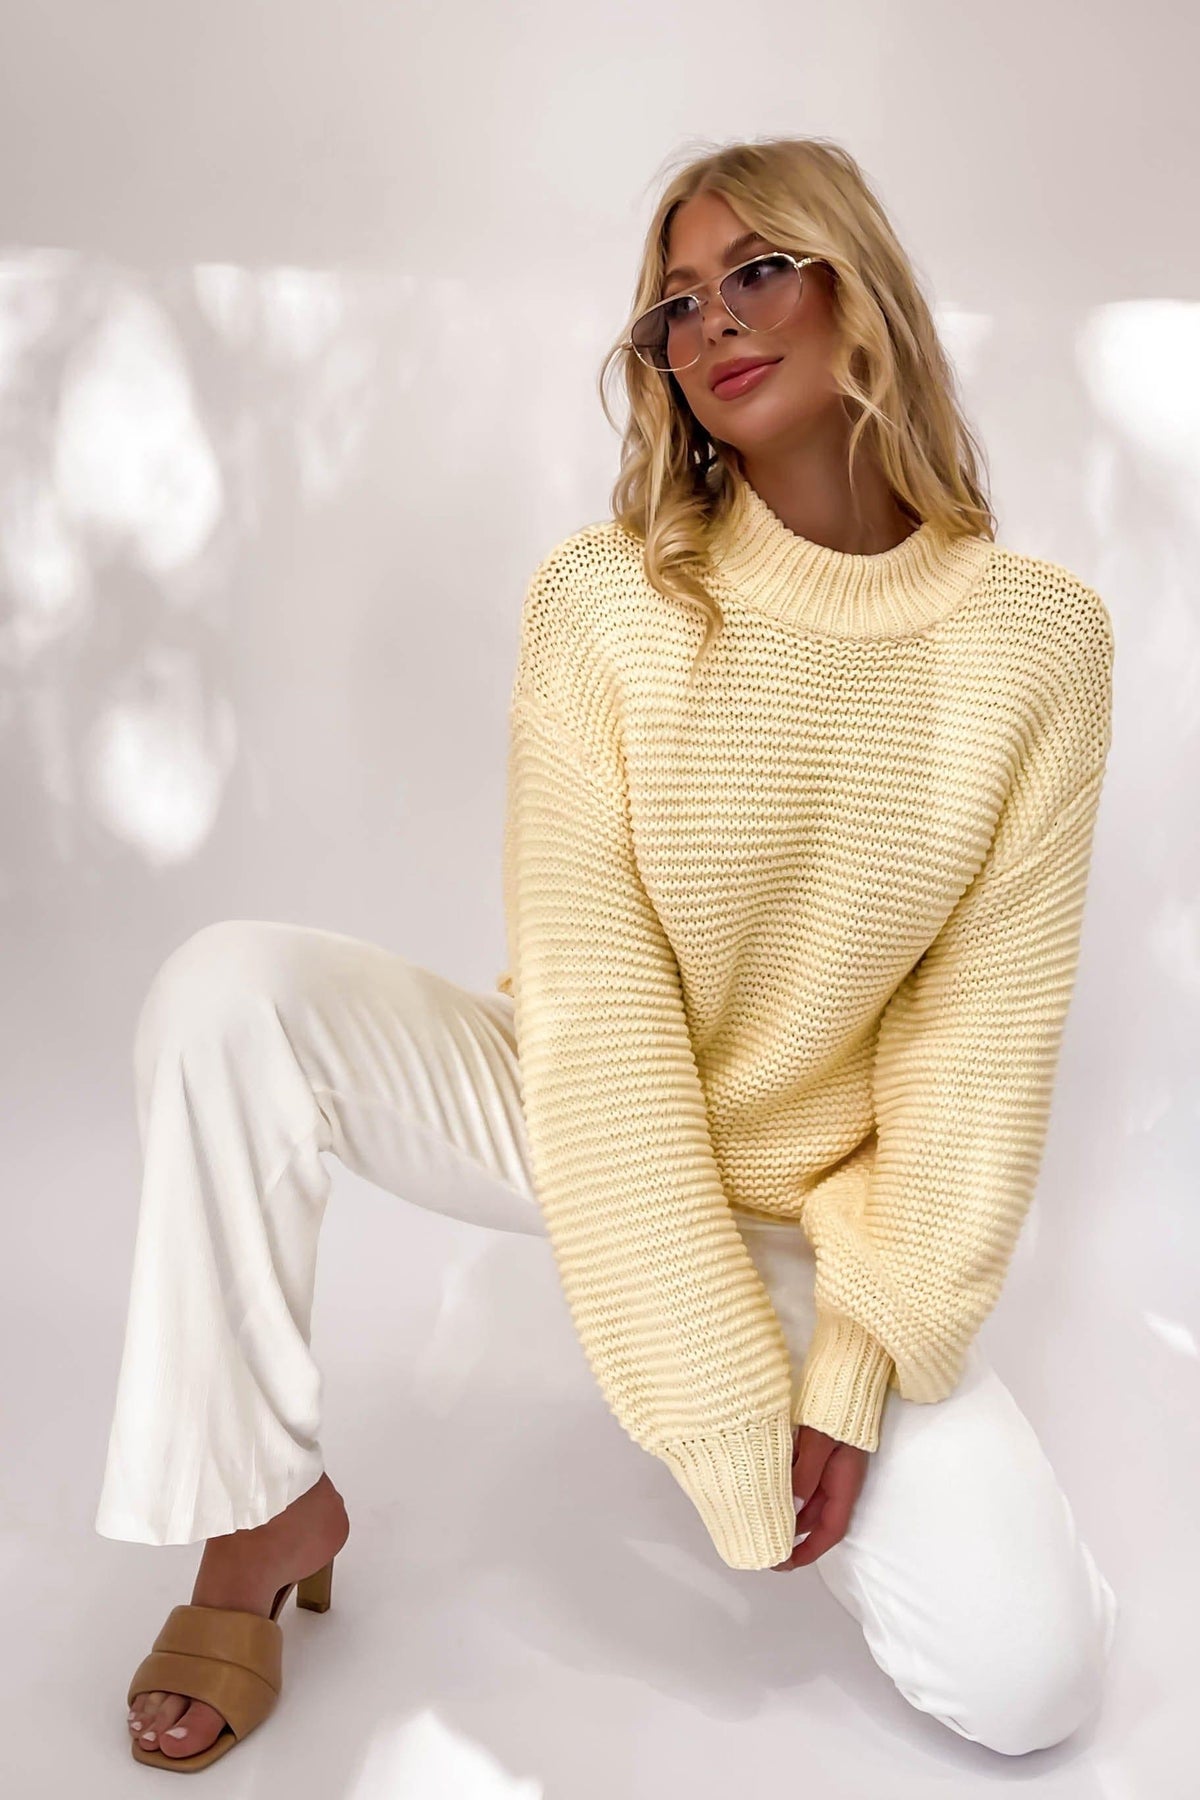 Alicia Top, ACRYLIC &amp; COTTON, ACRYLIC AND COTTON, COTTON &amp; ACRYLIC, COTTON AND ACRYLIC, LONG SLEEVE, new arrivals, YELLOW, , -MISHKAH